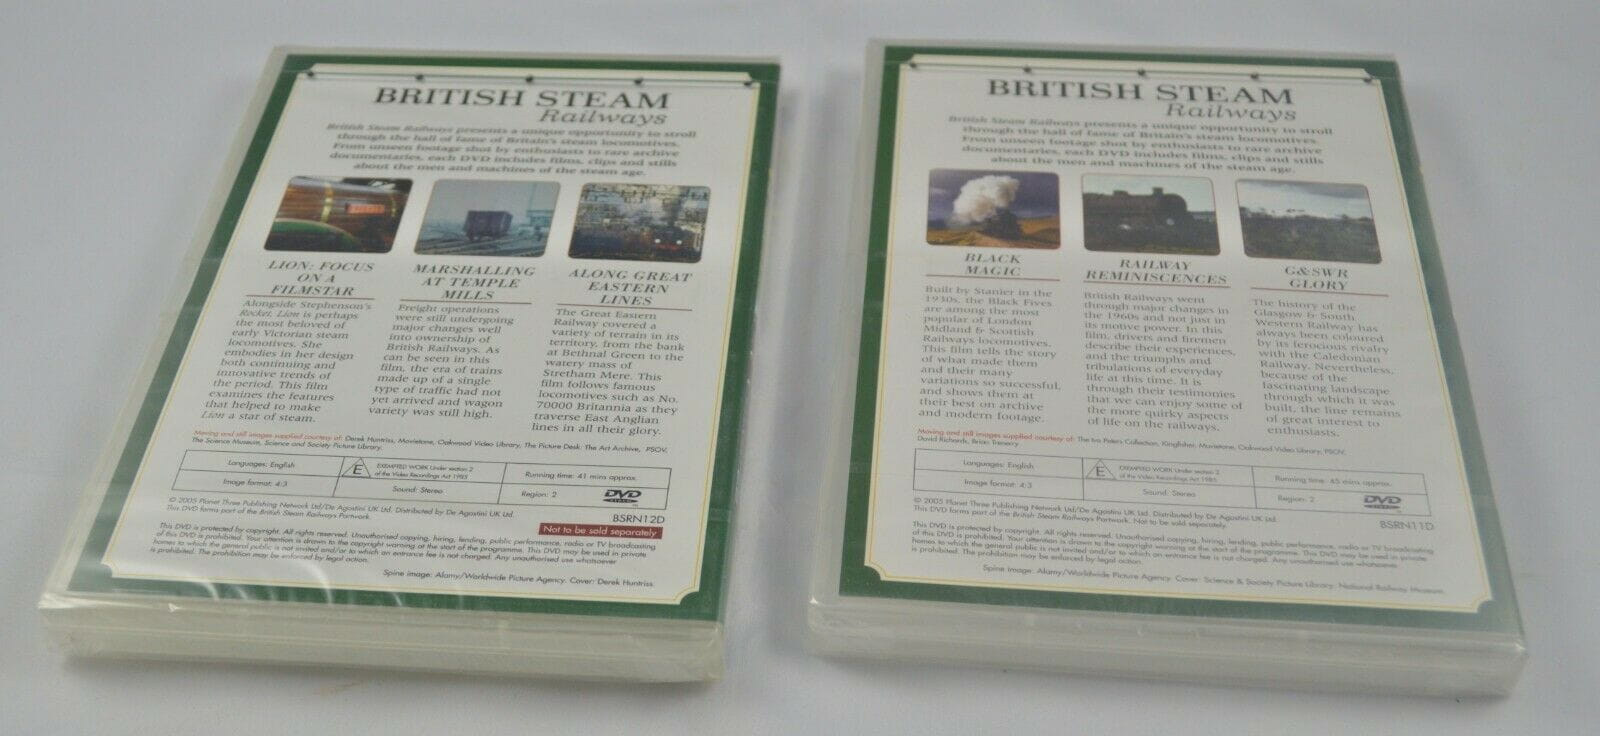 DVD’S BRITISH STEAM RAILWAYS 6 SEALED NOs 11/12/13/14/15/16 & 18/19 OPENED (PREVIOUSLY OWNED)GOOD CONDITION - TMD167207